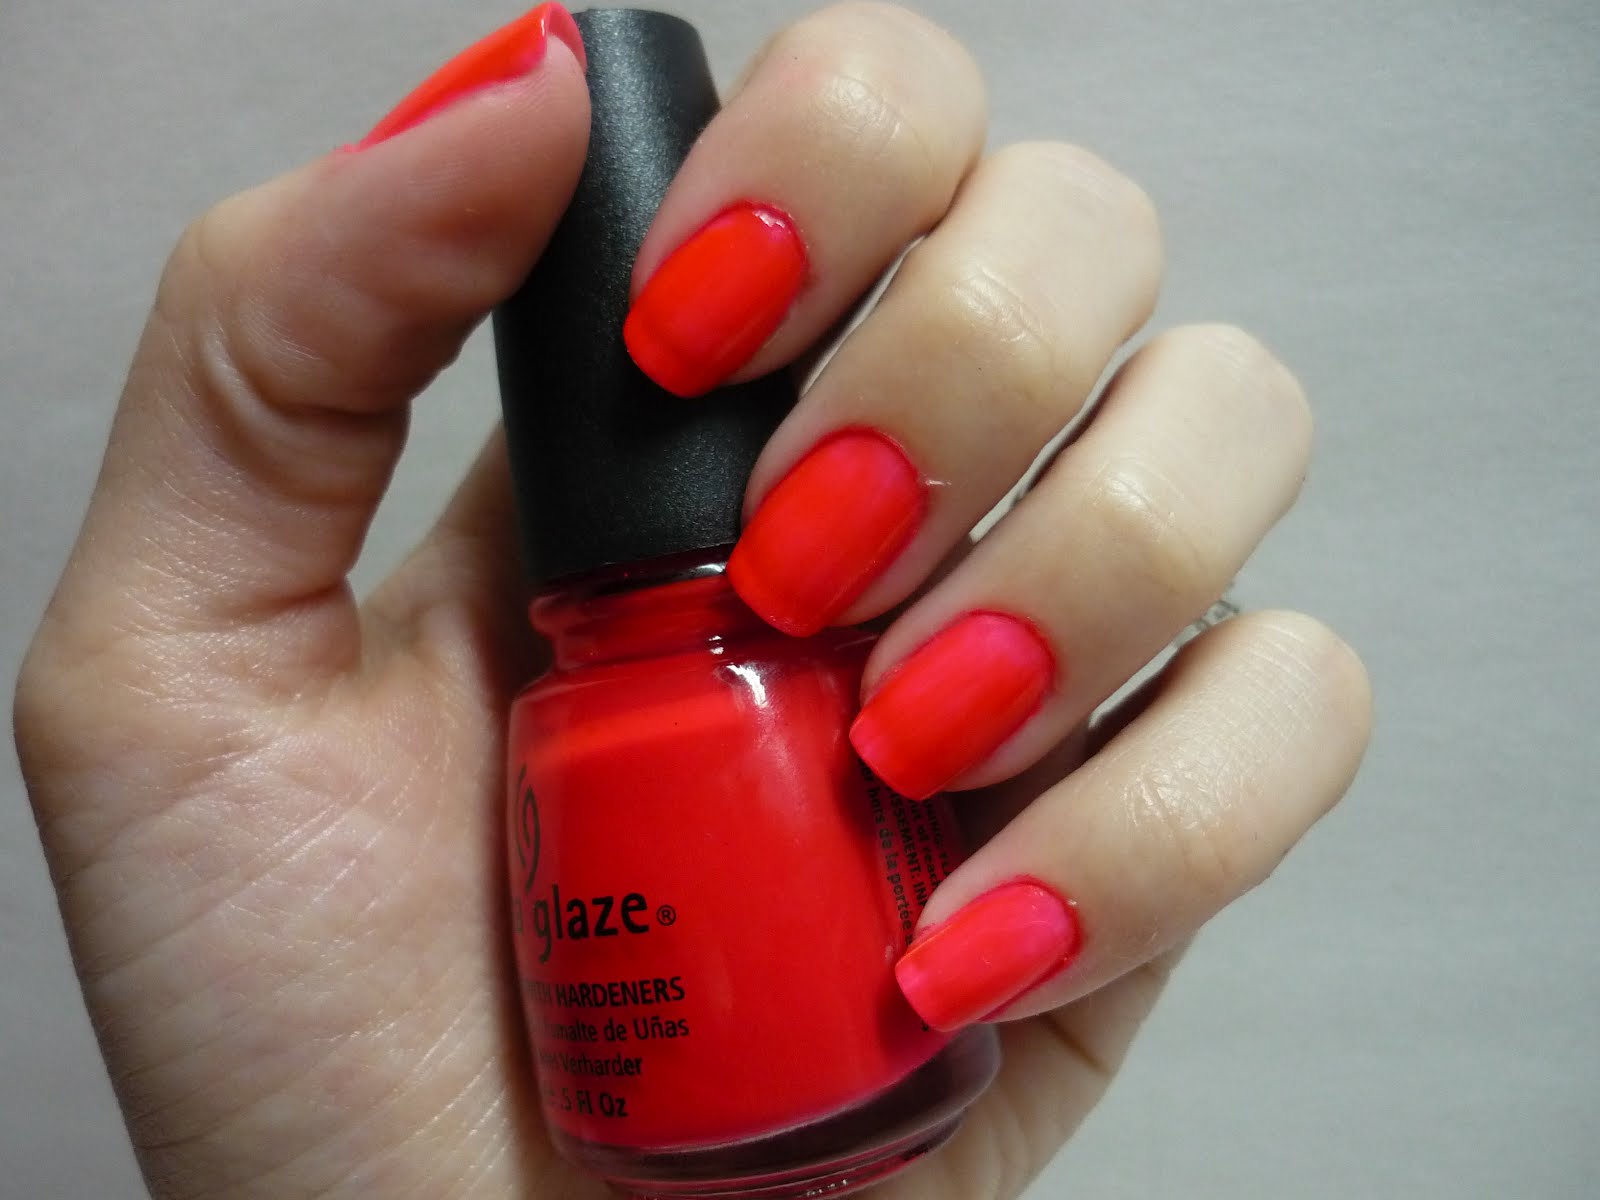 4. China Glaze Nail Lacquer in "Rose Among Thorns" - wide 6